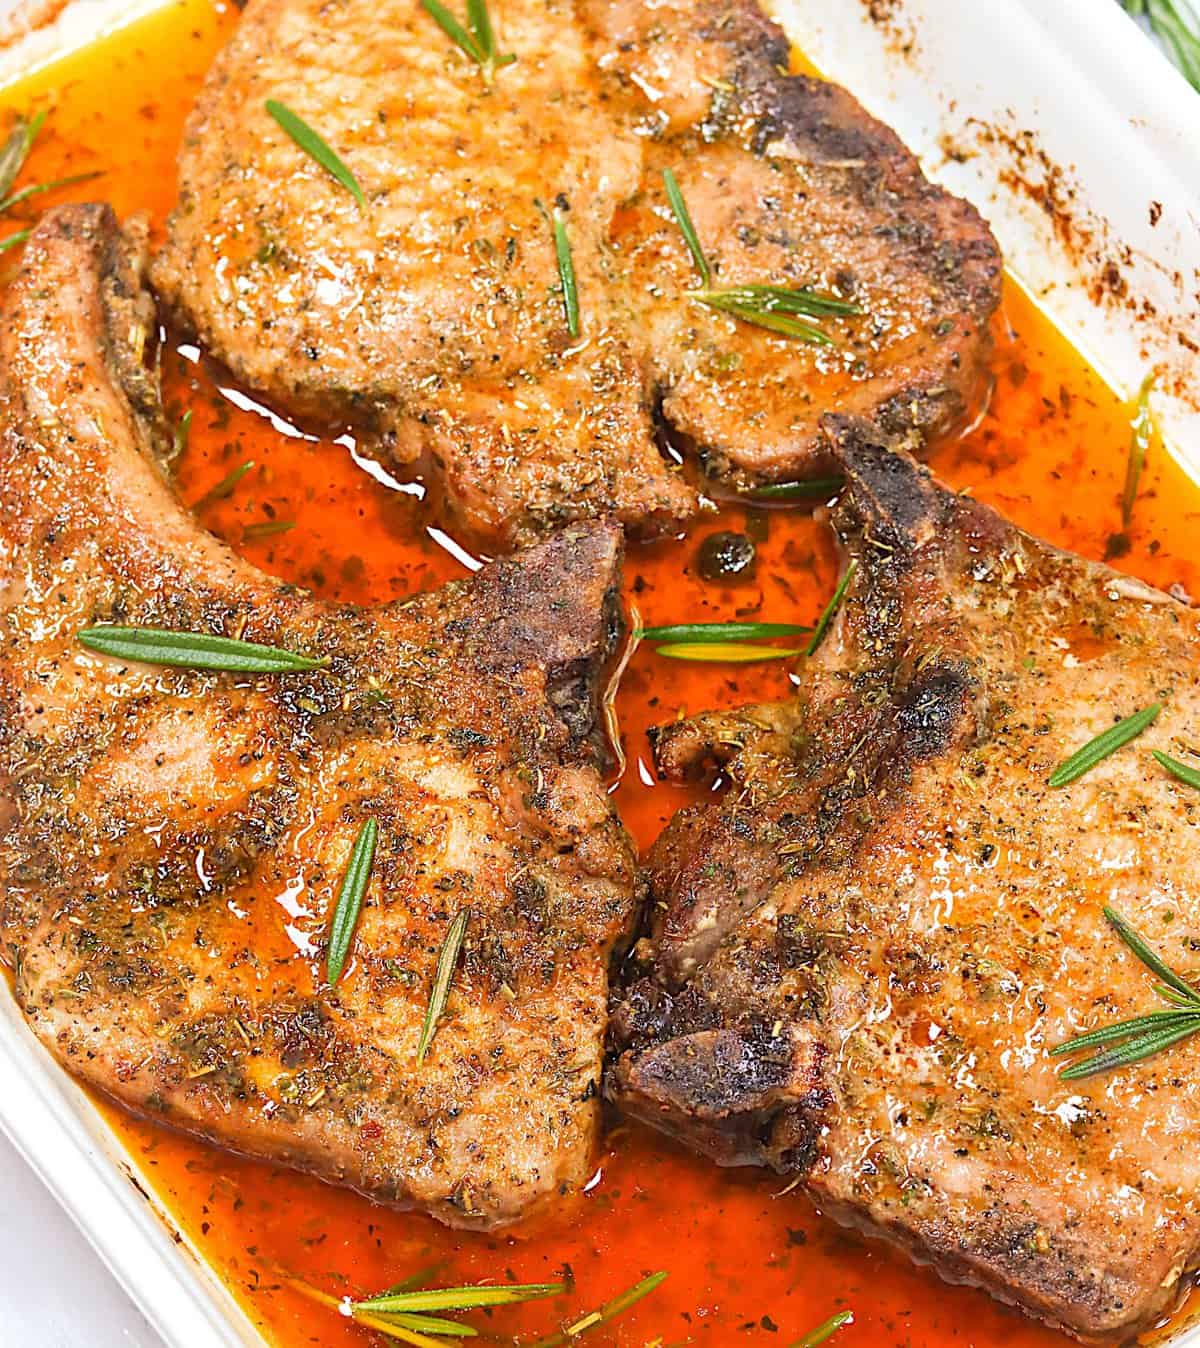 4-Ingredient Oven-Baked Pork Chops fresh from the oven and resting before enjoying